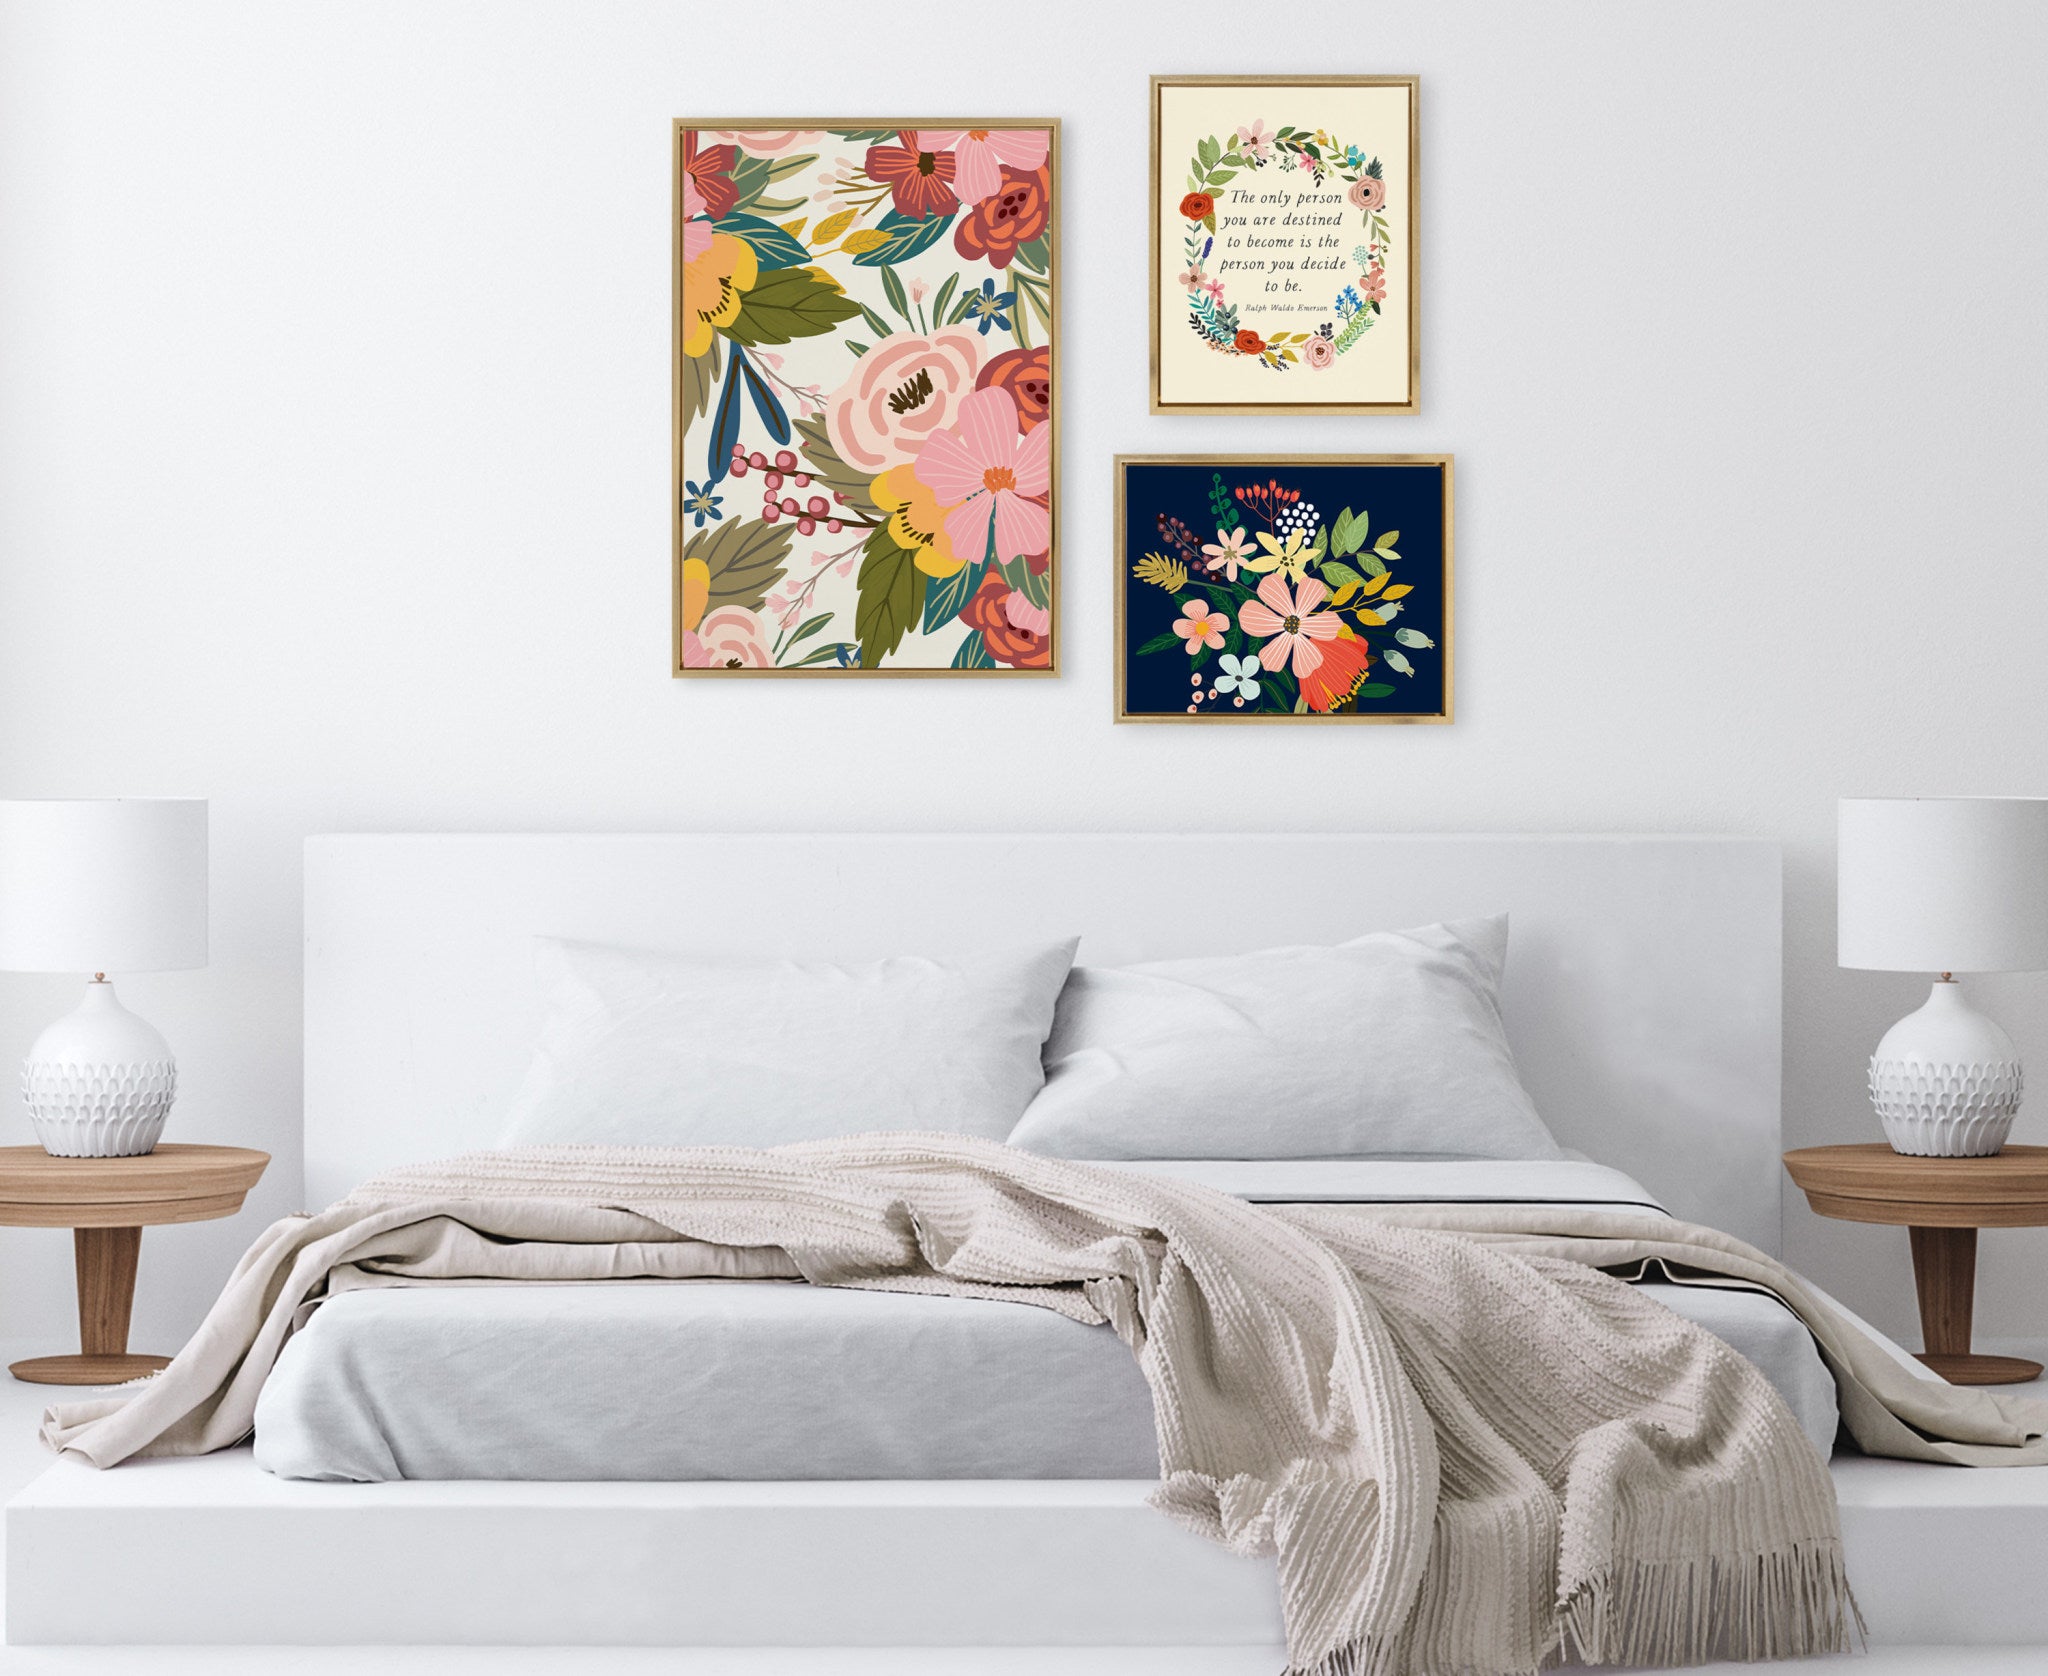 Sylvie Softly, MC 481 Floralis C and MC441 The Only Person Framed Canvas Art Set by Mia Charro